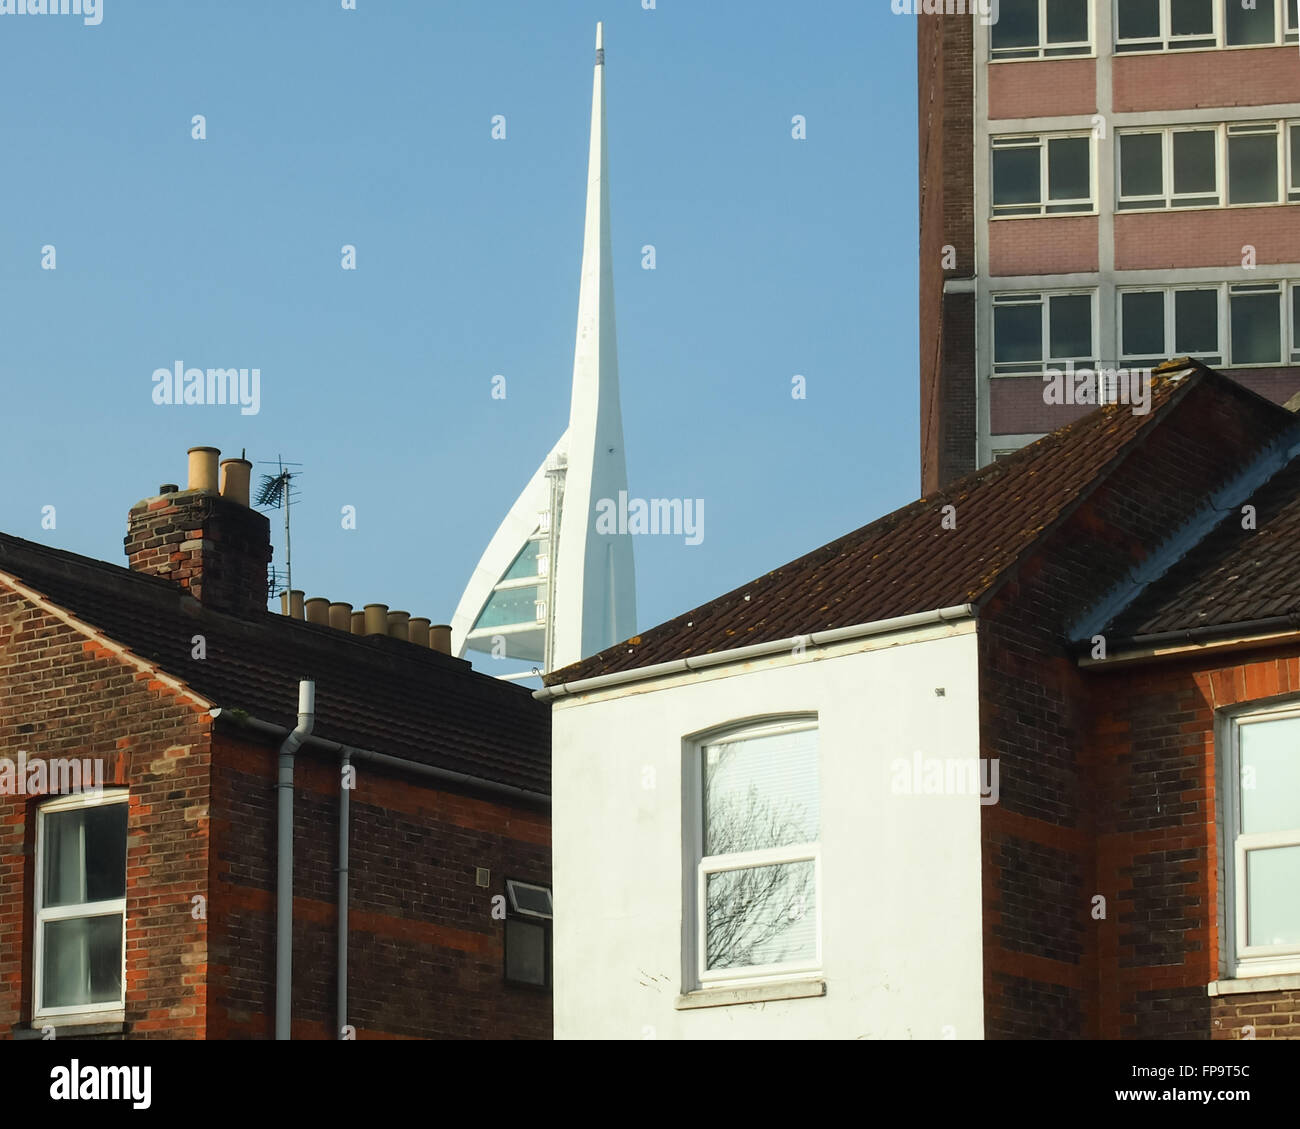 19th century housing is overlooked by the modern Spinnaker tower in Portsmouth, England Stock Photo